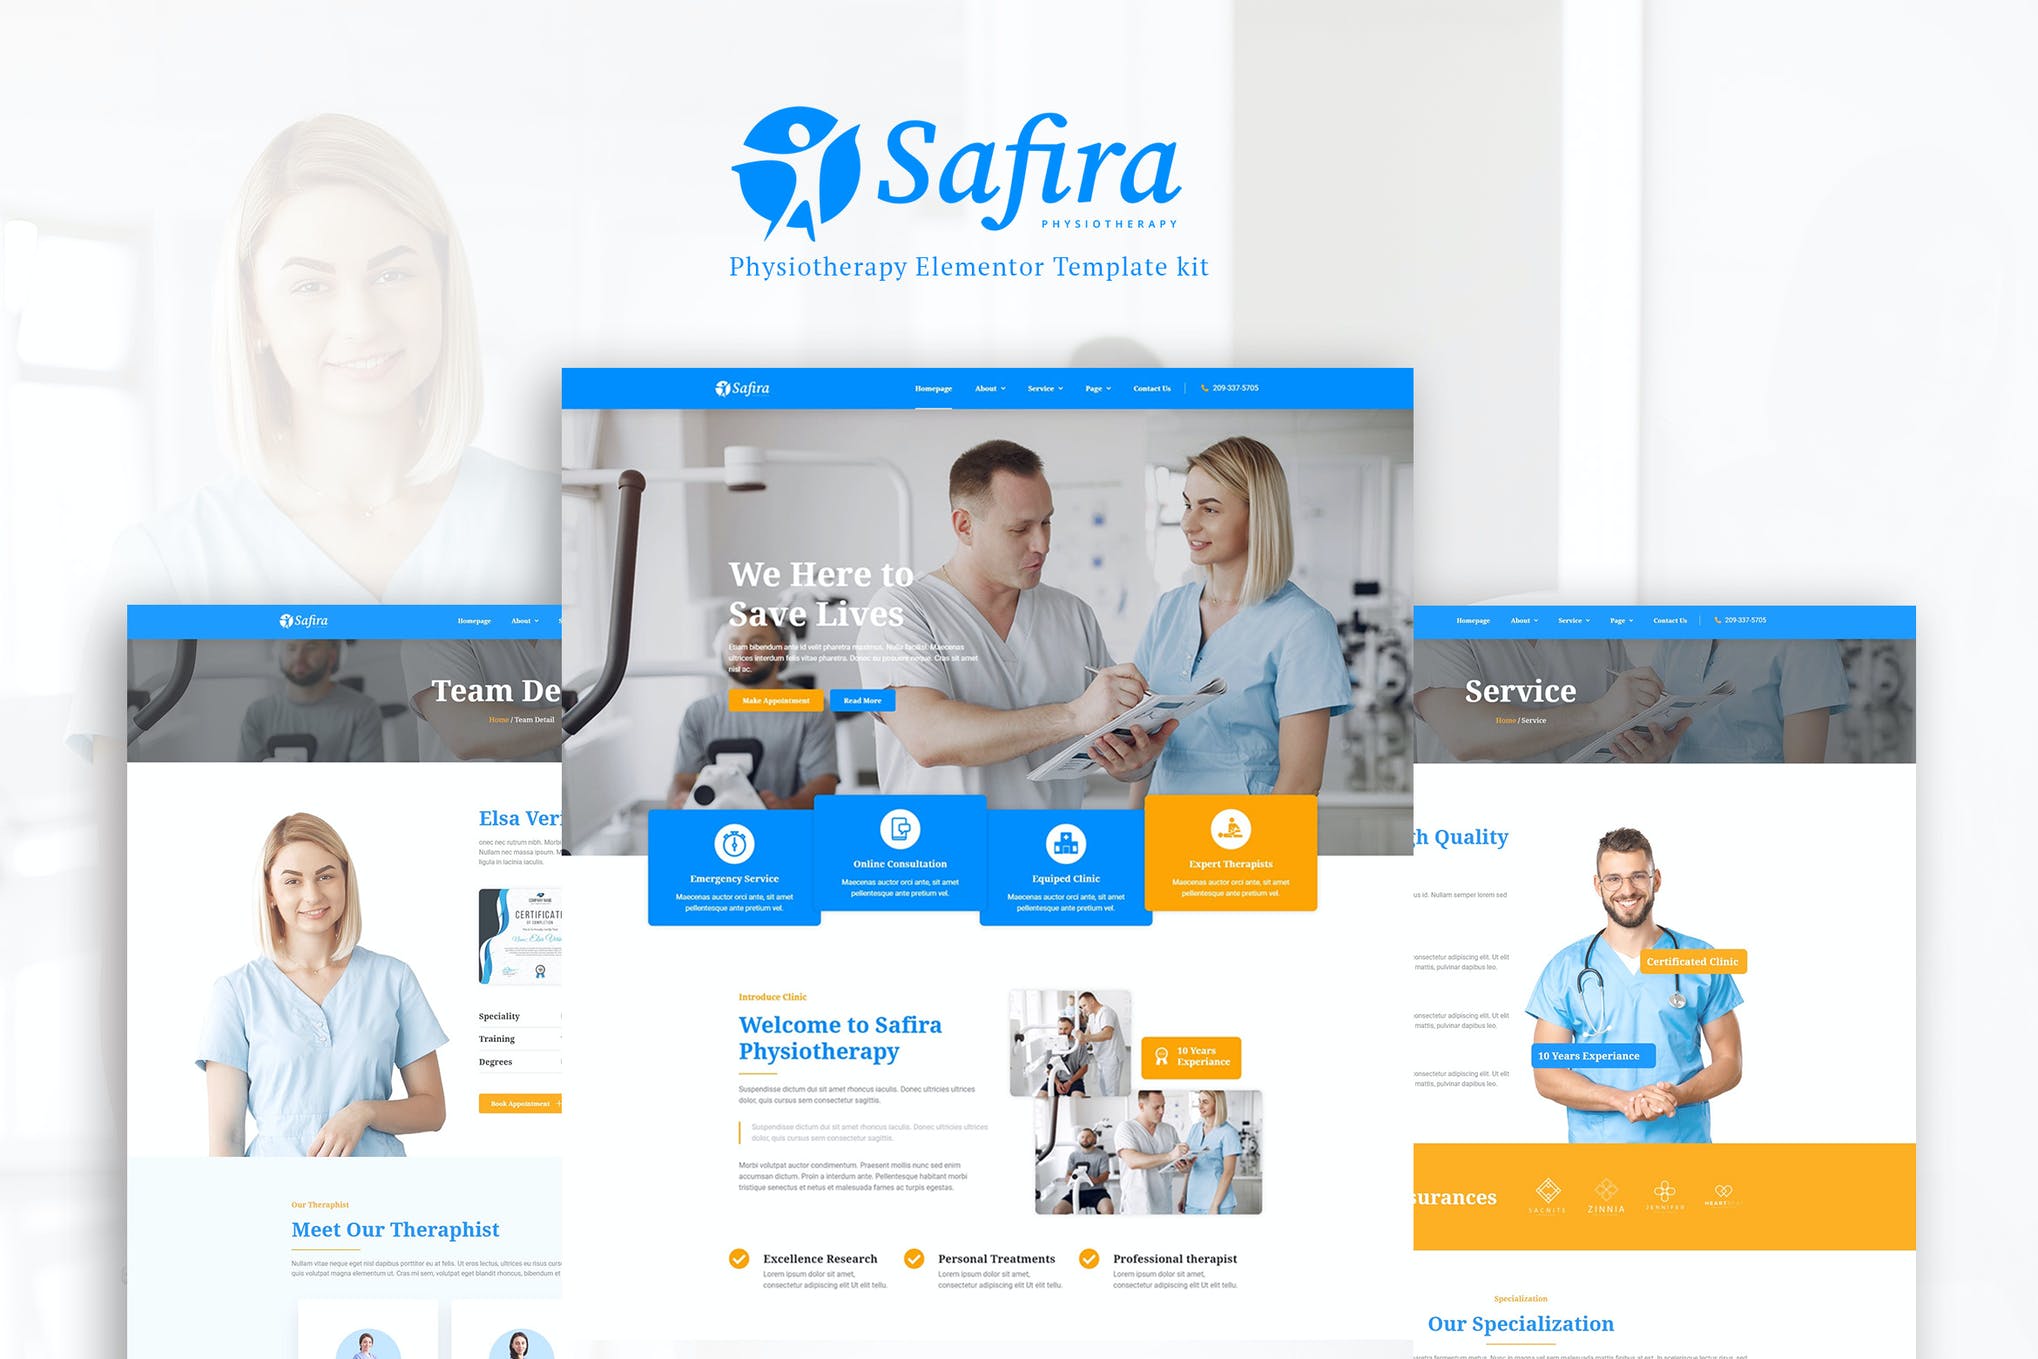 Safira - Physioterapy Elementor Template Kit